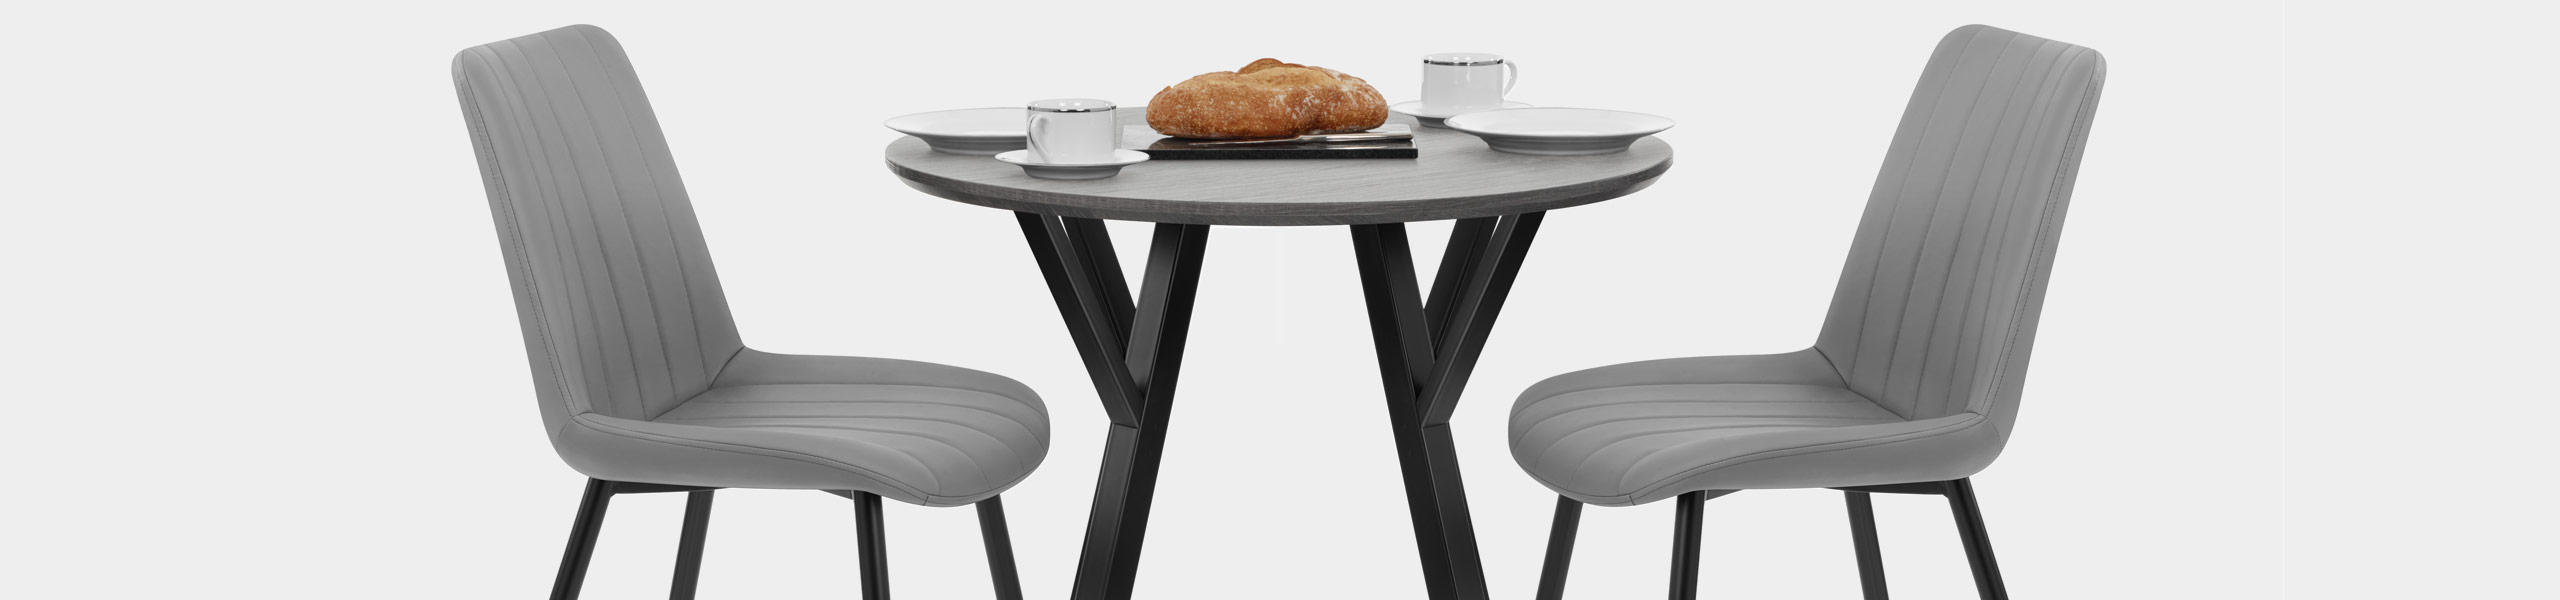 Wessex Dining Set Grey Wood & Mid Grey Video Banner